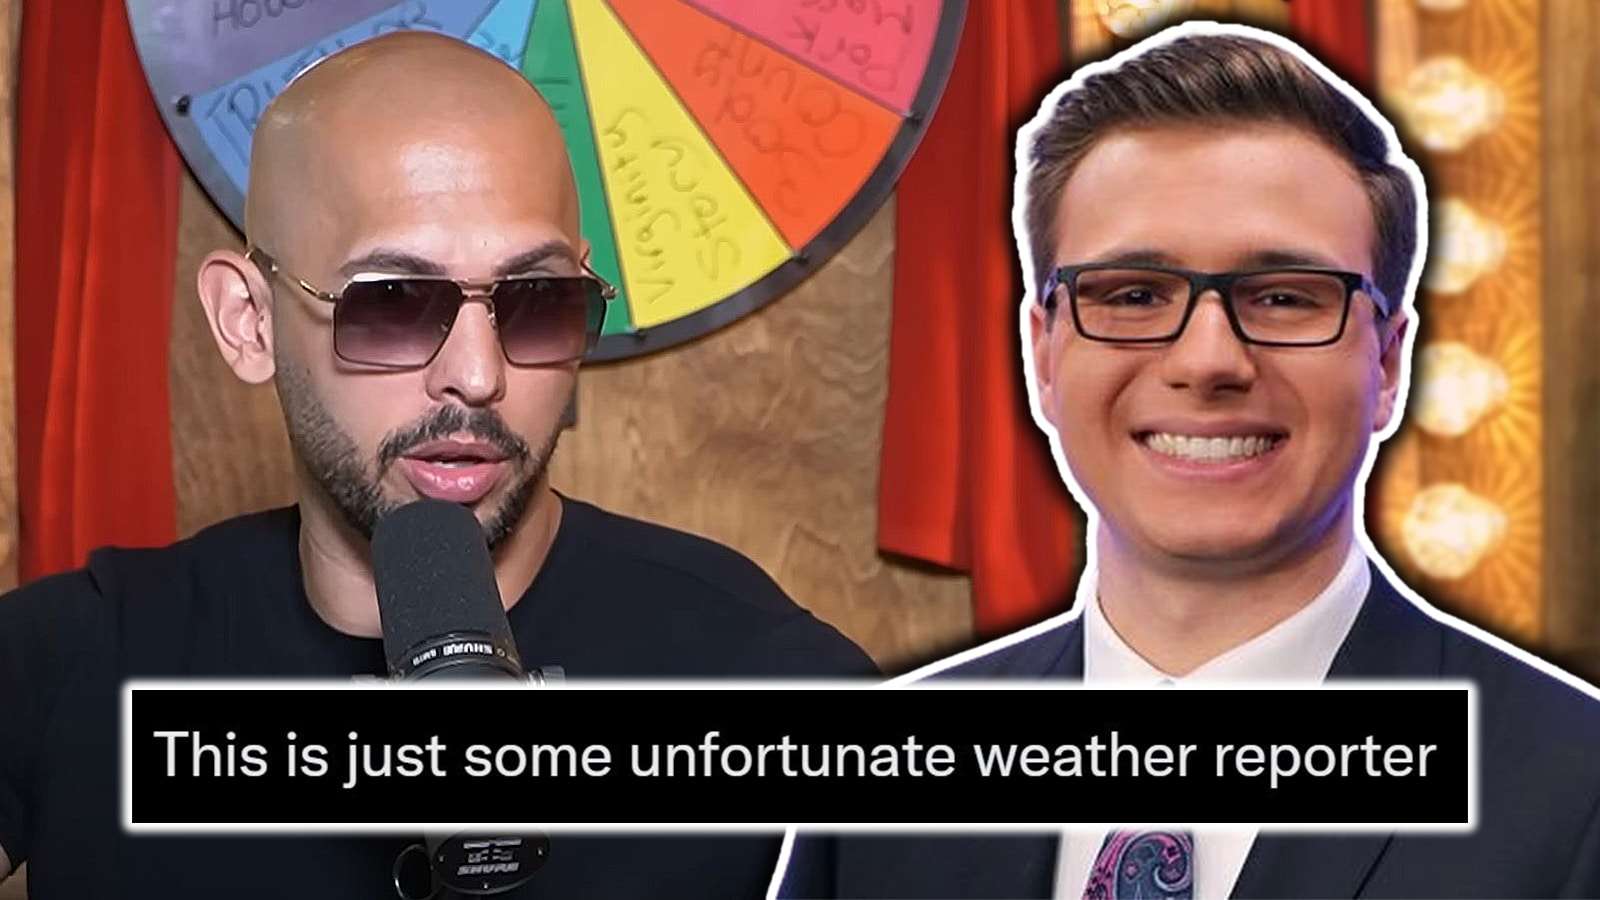 Unfortunate weather reporter mistaken for andrew tate